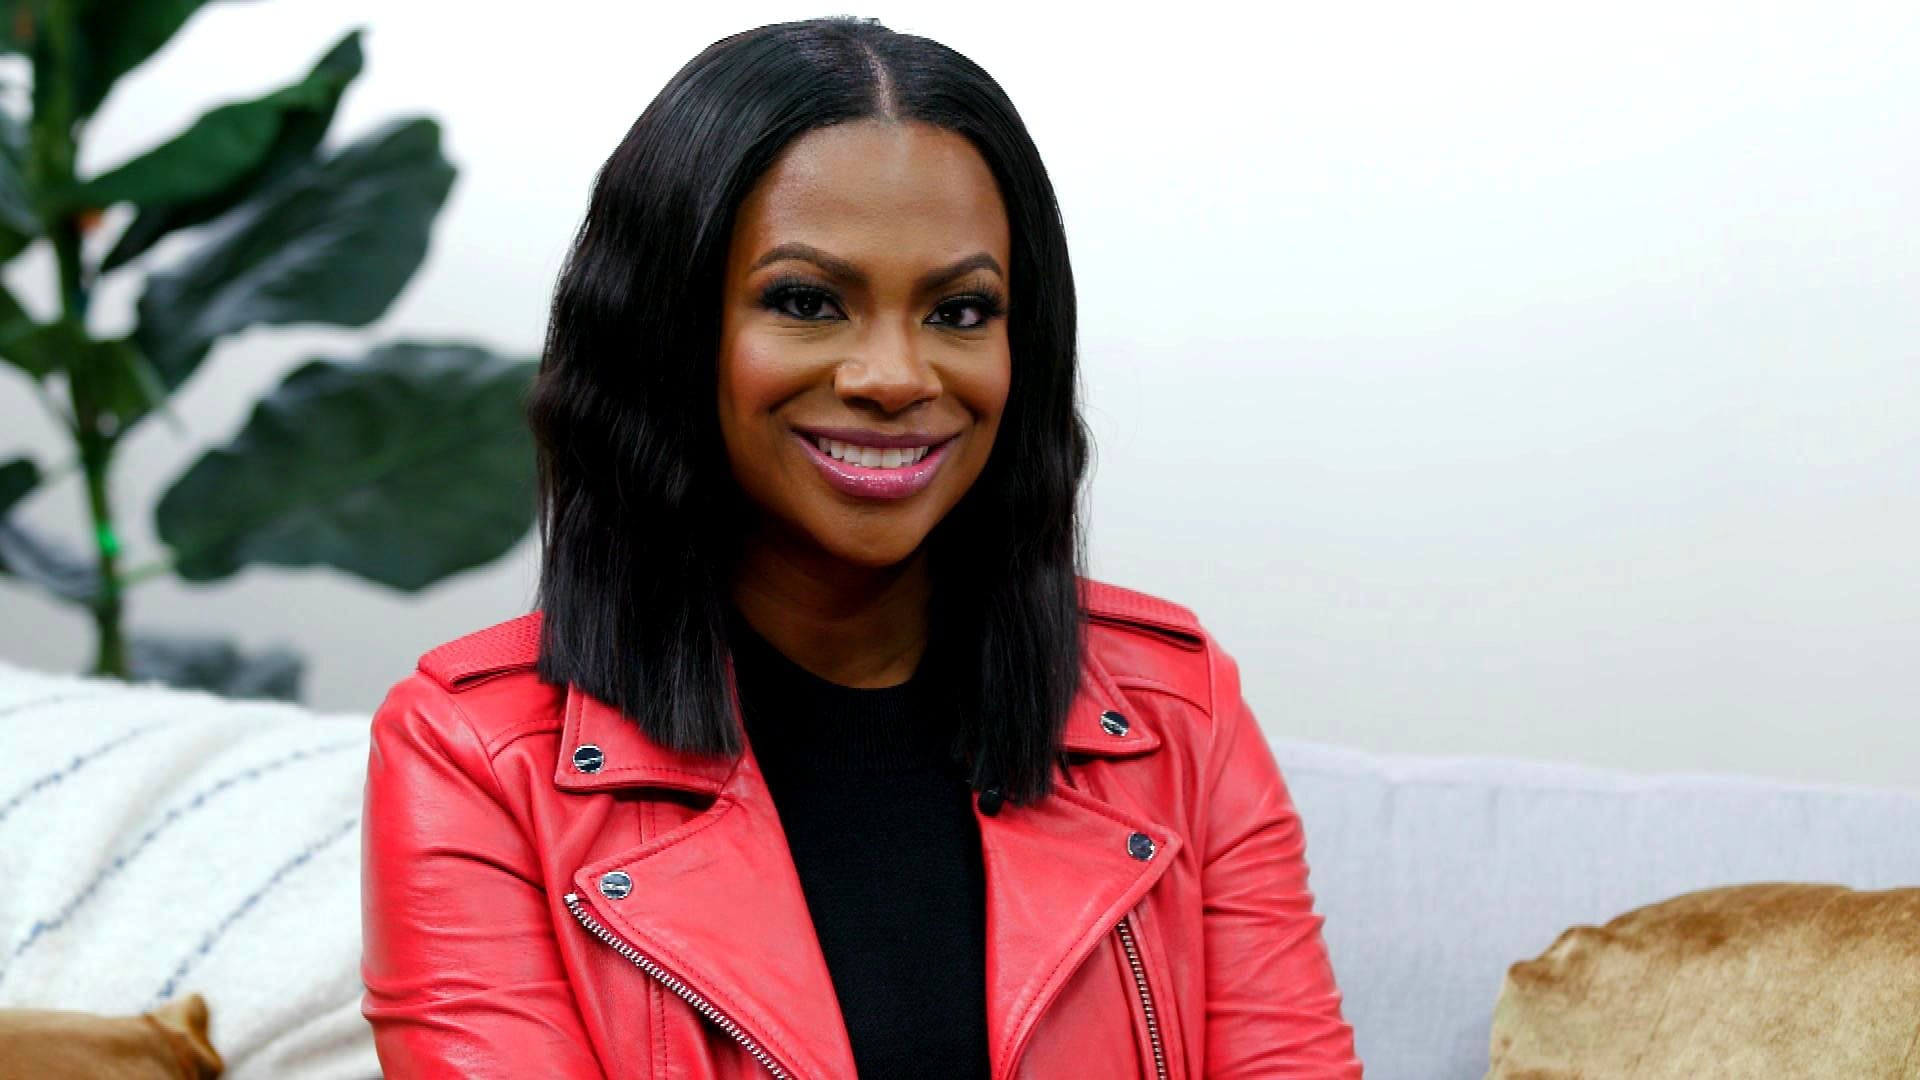 ”kandi-burruss-had-an-excellent-convo-with-jarrett-hill-see-the-video-here”